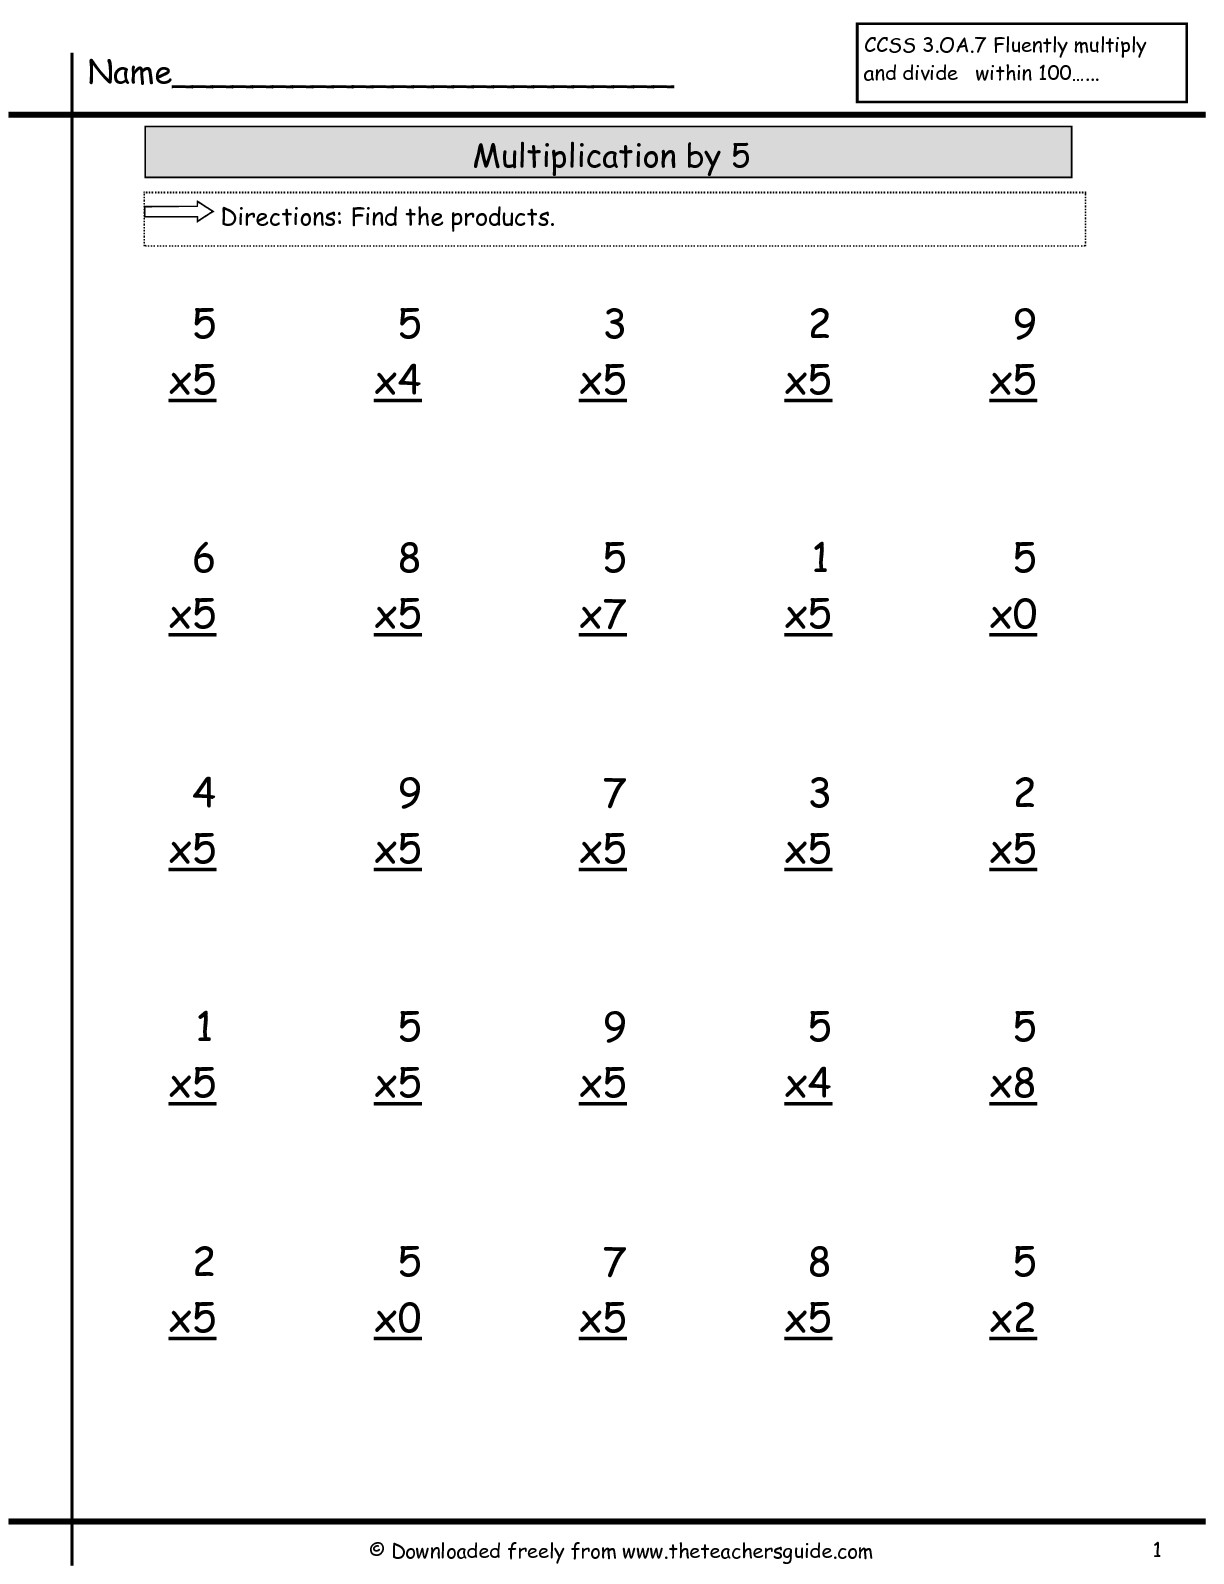 Multiplication Facts Worksheets From The Teacher&amp;#039;s Guide regarding Multiplication Worksheets Up To 5